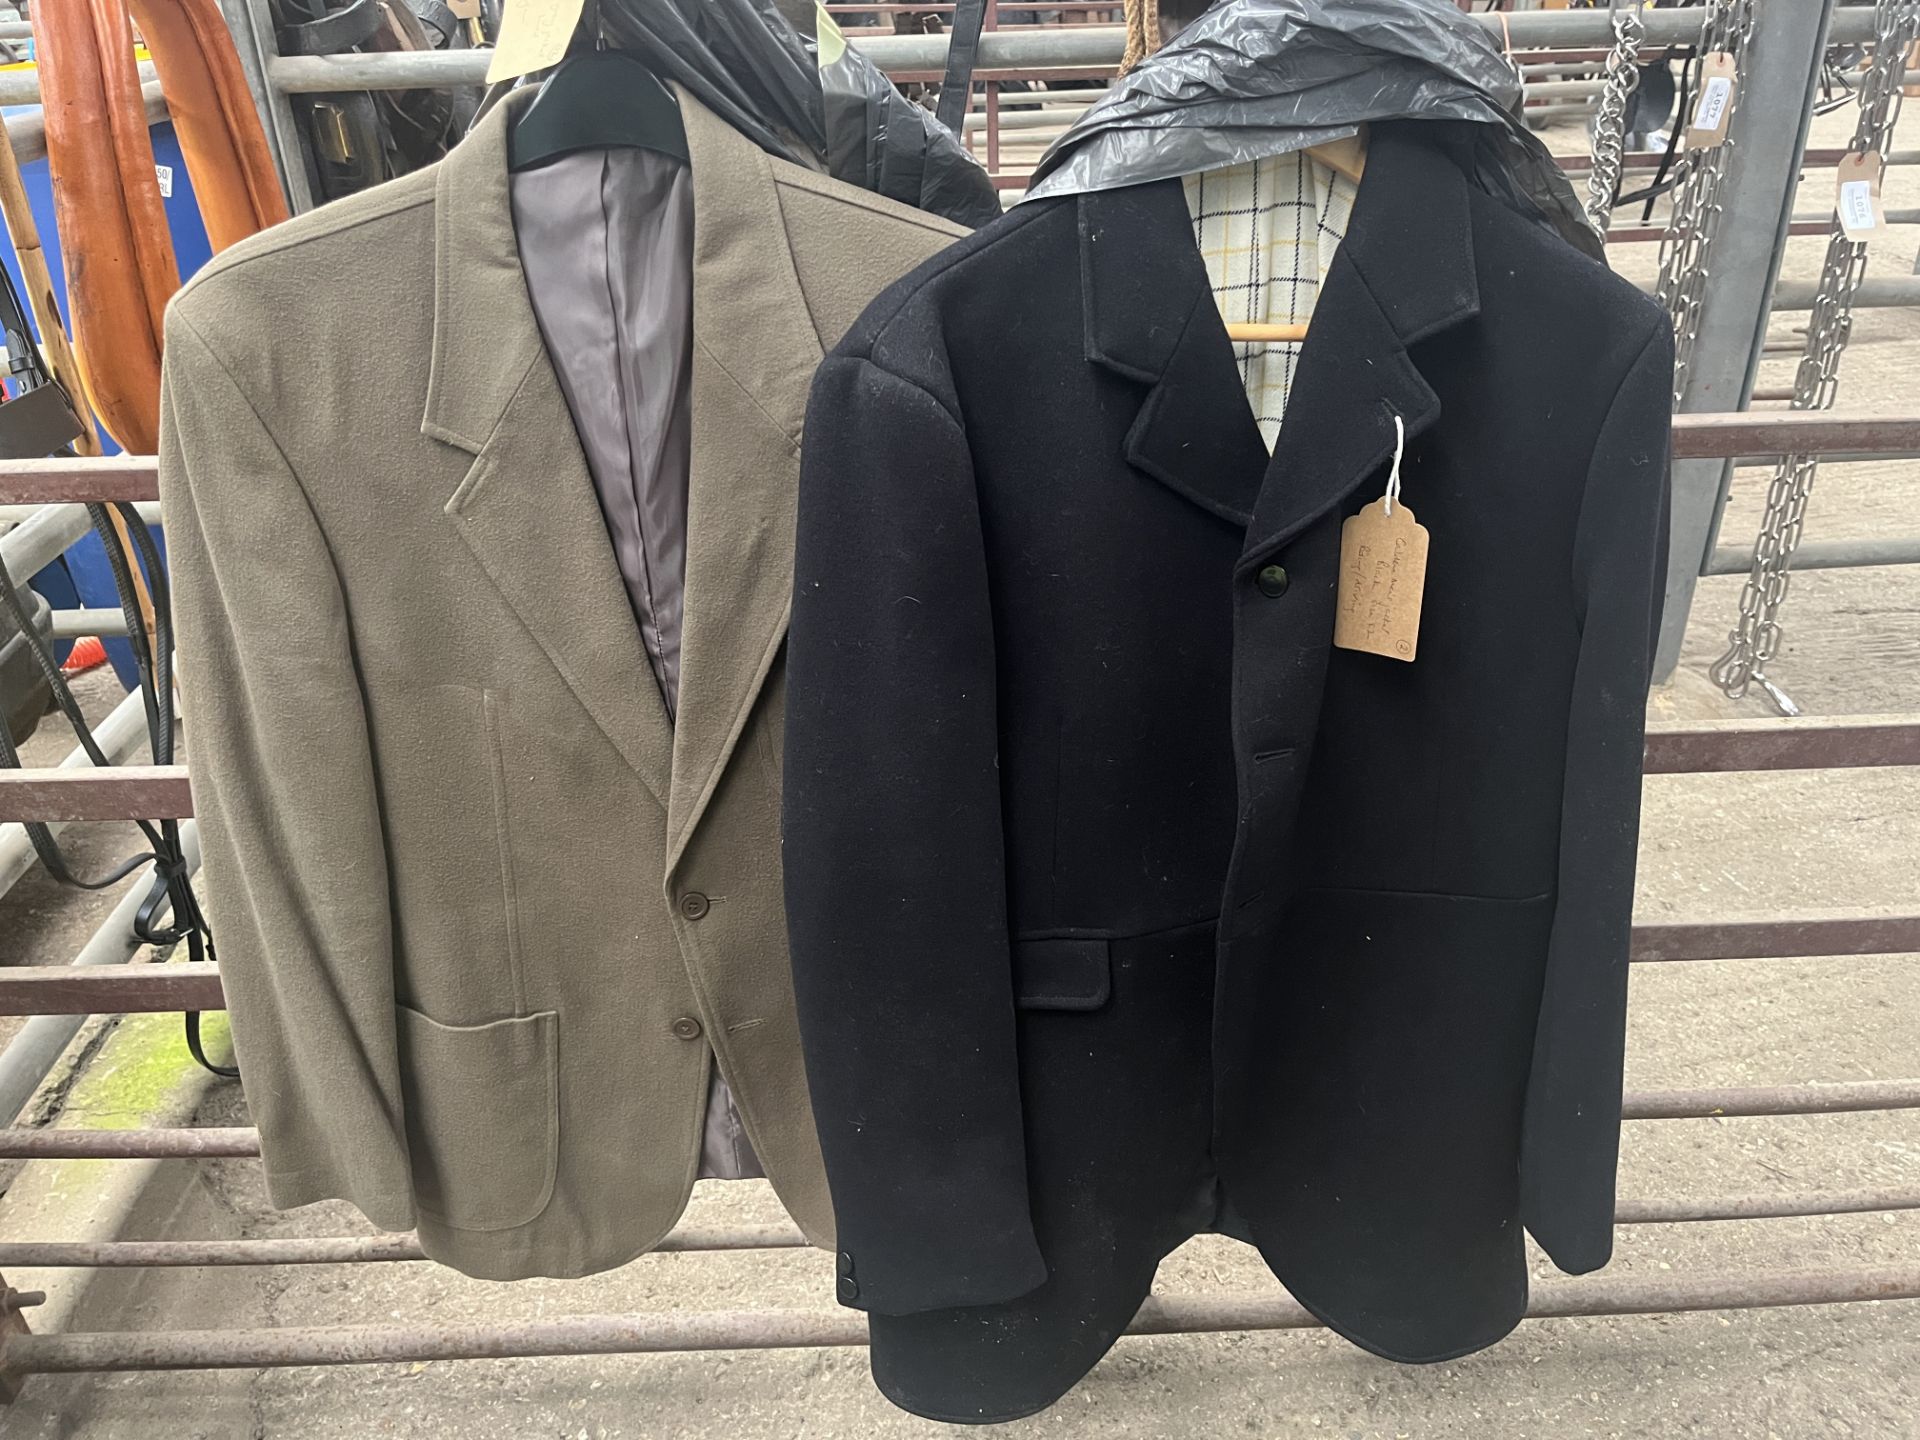 Men's short grey jacket, size large by Chums and a black men's riding jacket, size 42